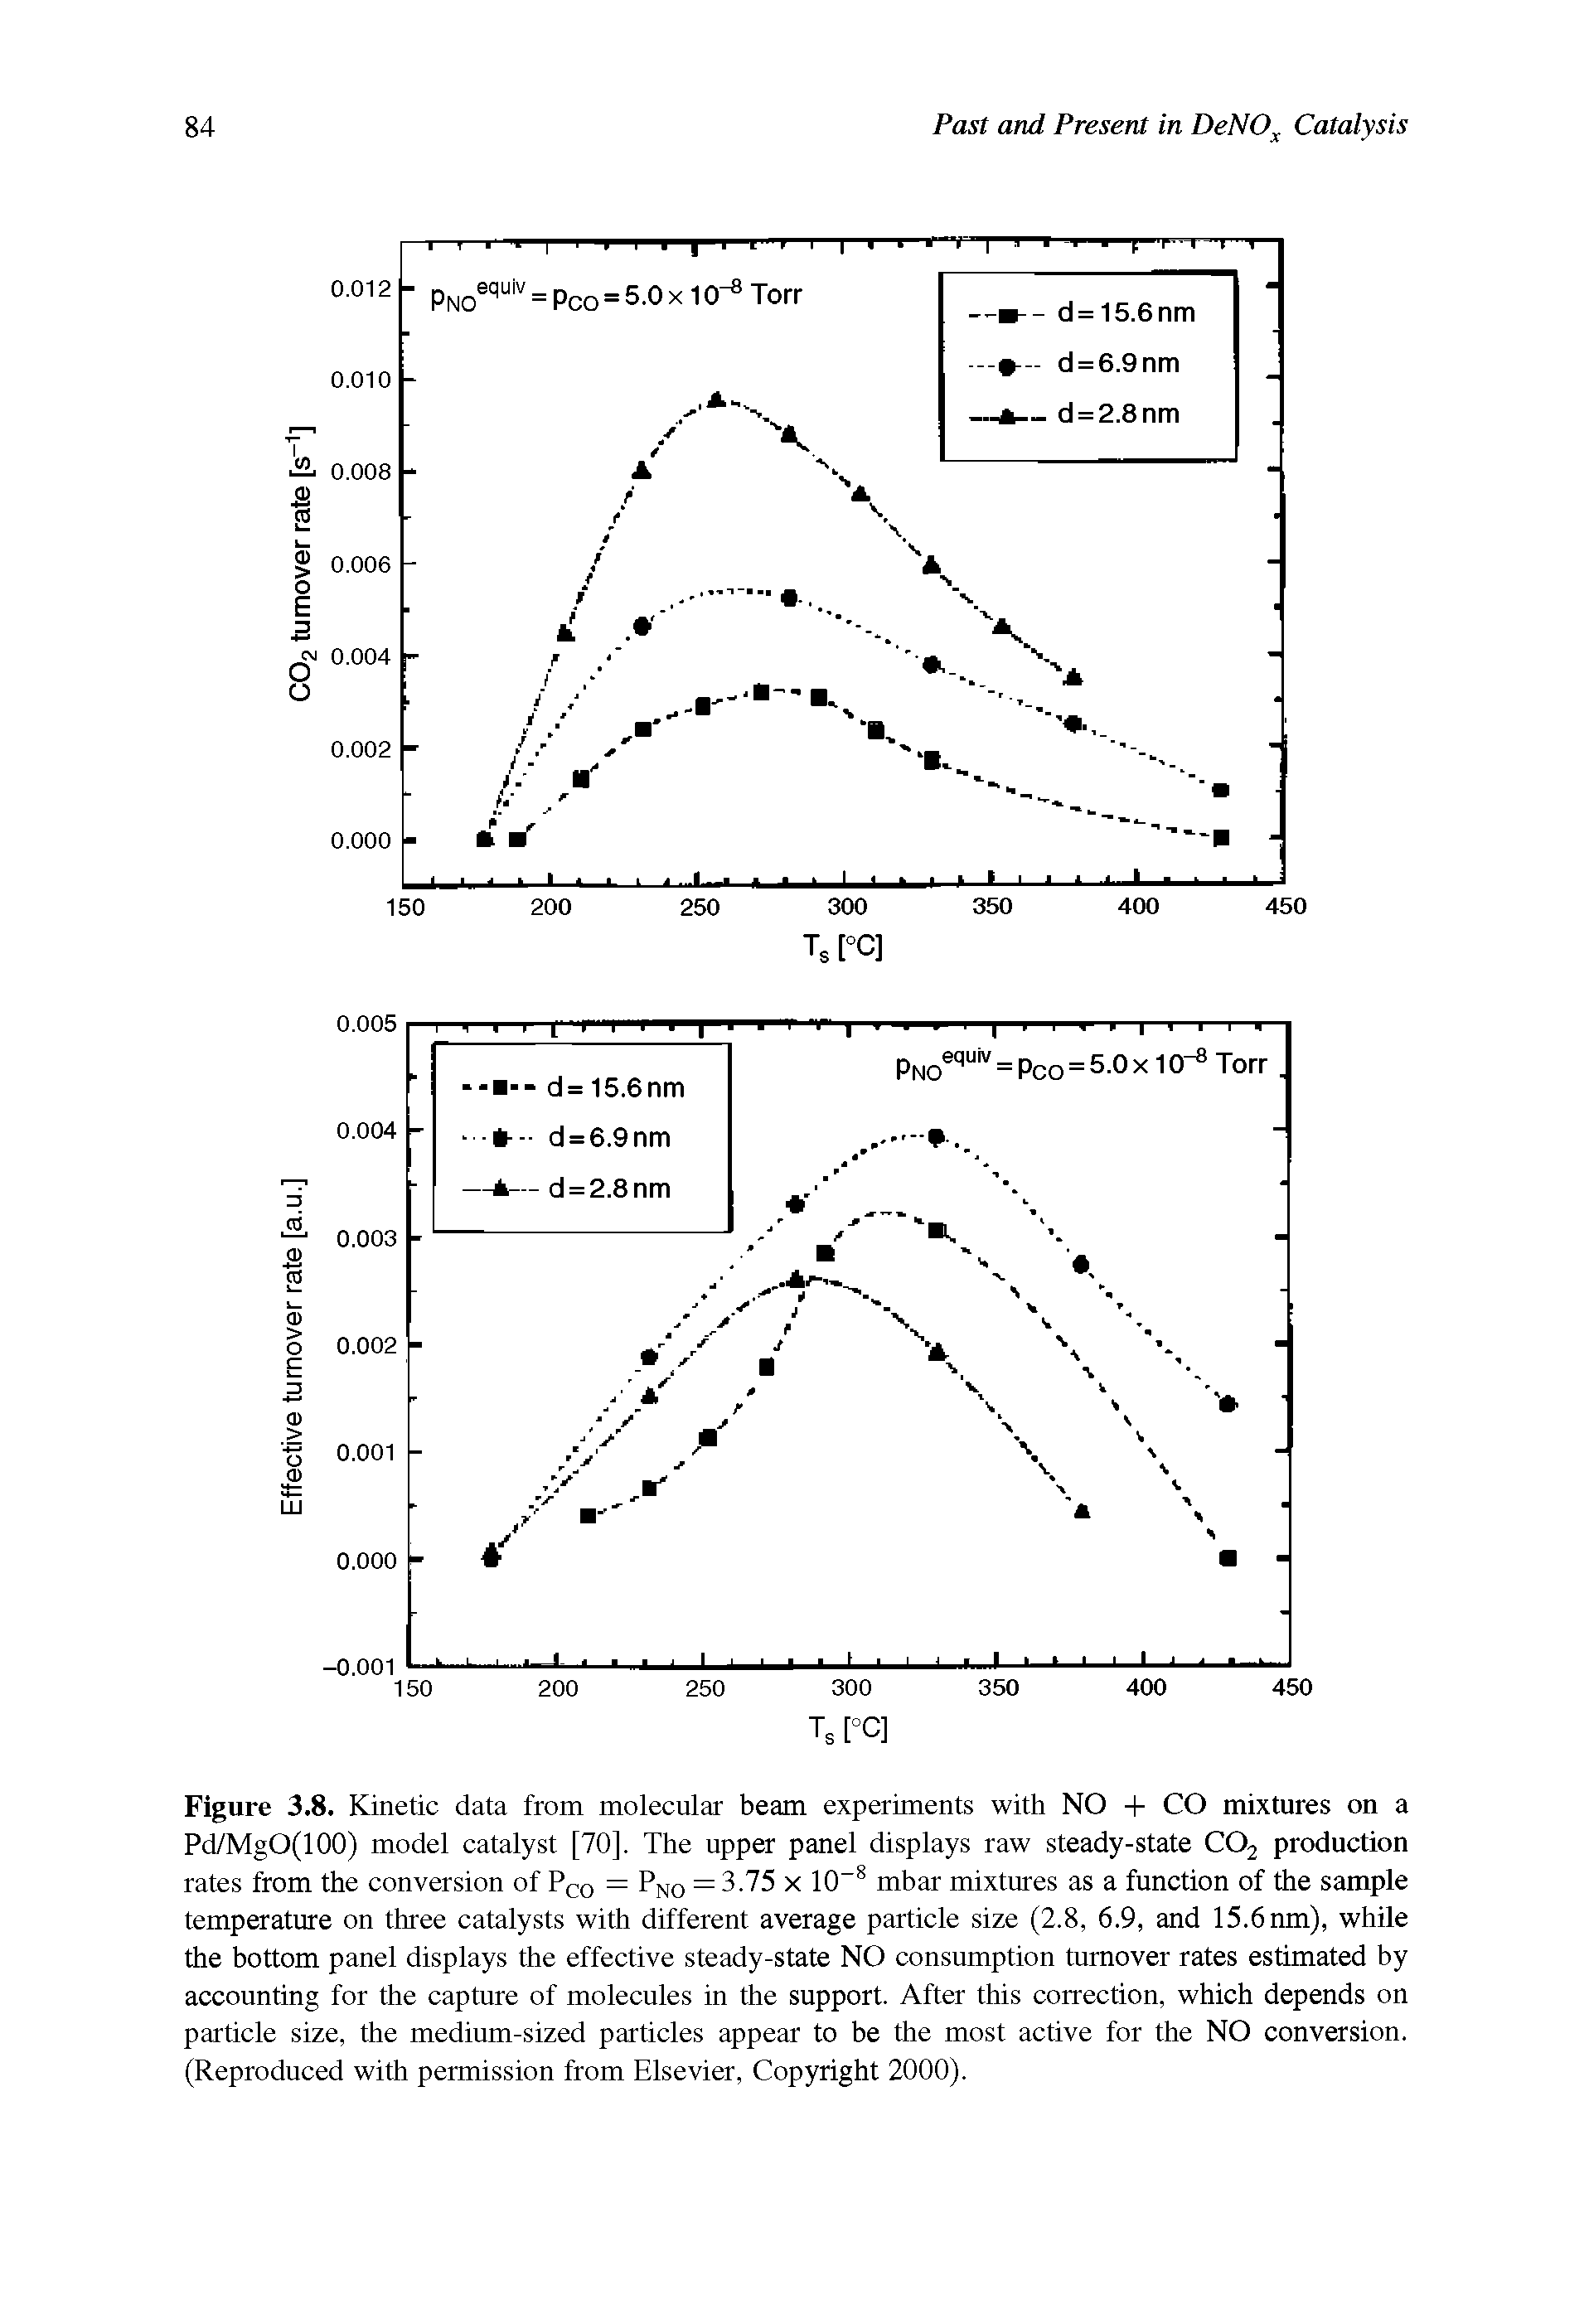 Figure 3.8. Kinetic data from molecular beam experiments with NO + CO mixtures on a Pd/MgO(100) model catalyst [70]. The upper panel displays raw steady-state C02 production rates from the conversion of Pco = PN0 = 3.75 x 10-8 mbar mixtures as a function of the sample temperature on three catalysts with different average particle size (2.8, 6.9, and 15.6 nm), while the bottom panel displays the effective steady-state NO consumption turnover rates estimated by accounting for the capture of molecules in the support. After this correction, which depends on particle size, the medium-sized particles appear to be the most active for the NO conversion. (Reproduced with permission from Elsevier, Copyright 2000).